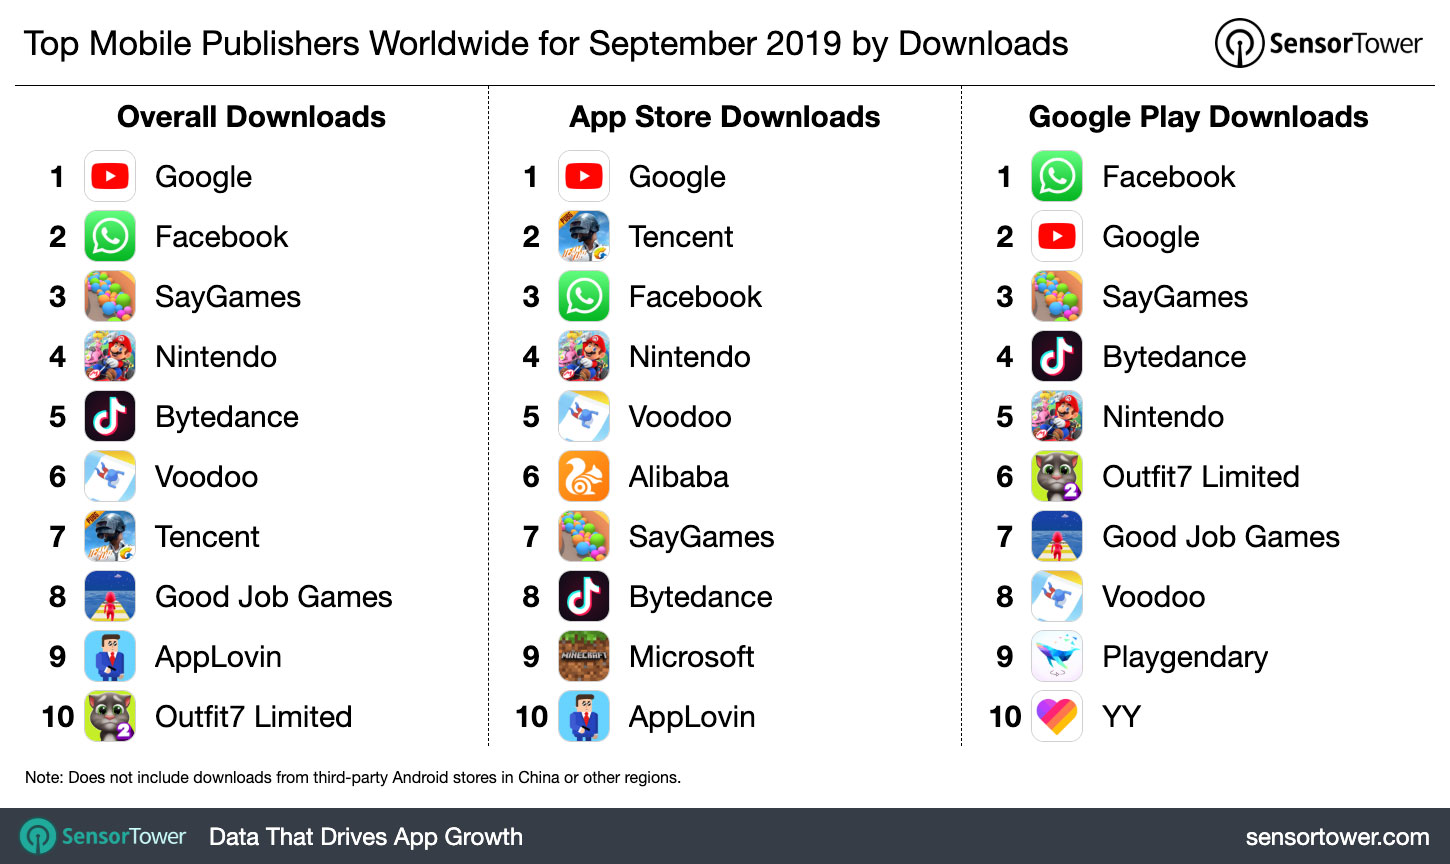 Top Mobile Publishers Worldwide for September 2019 by Downloads